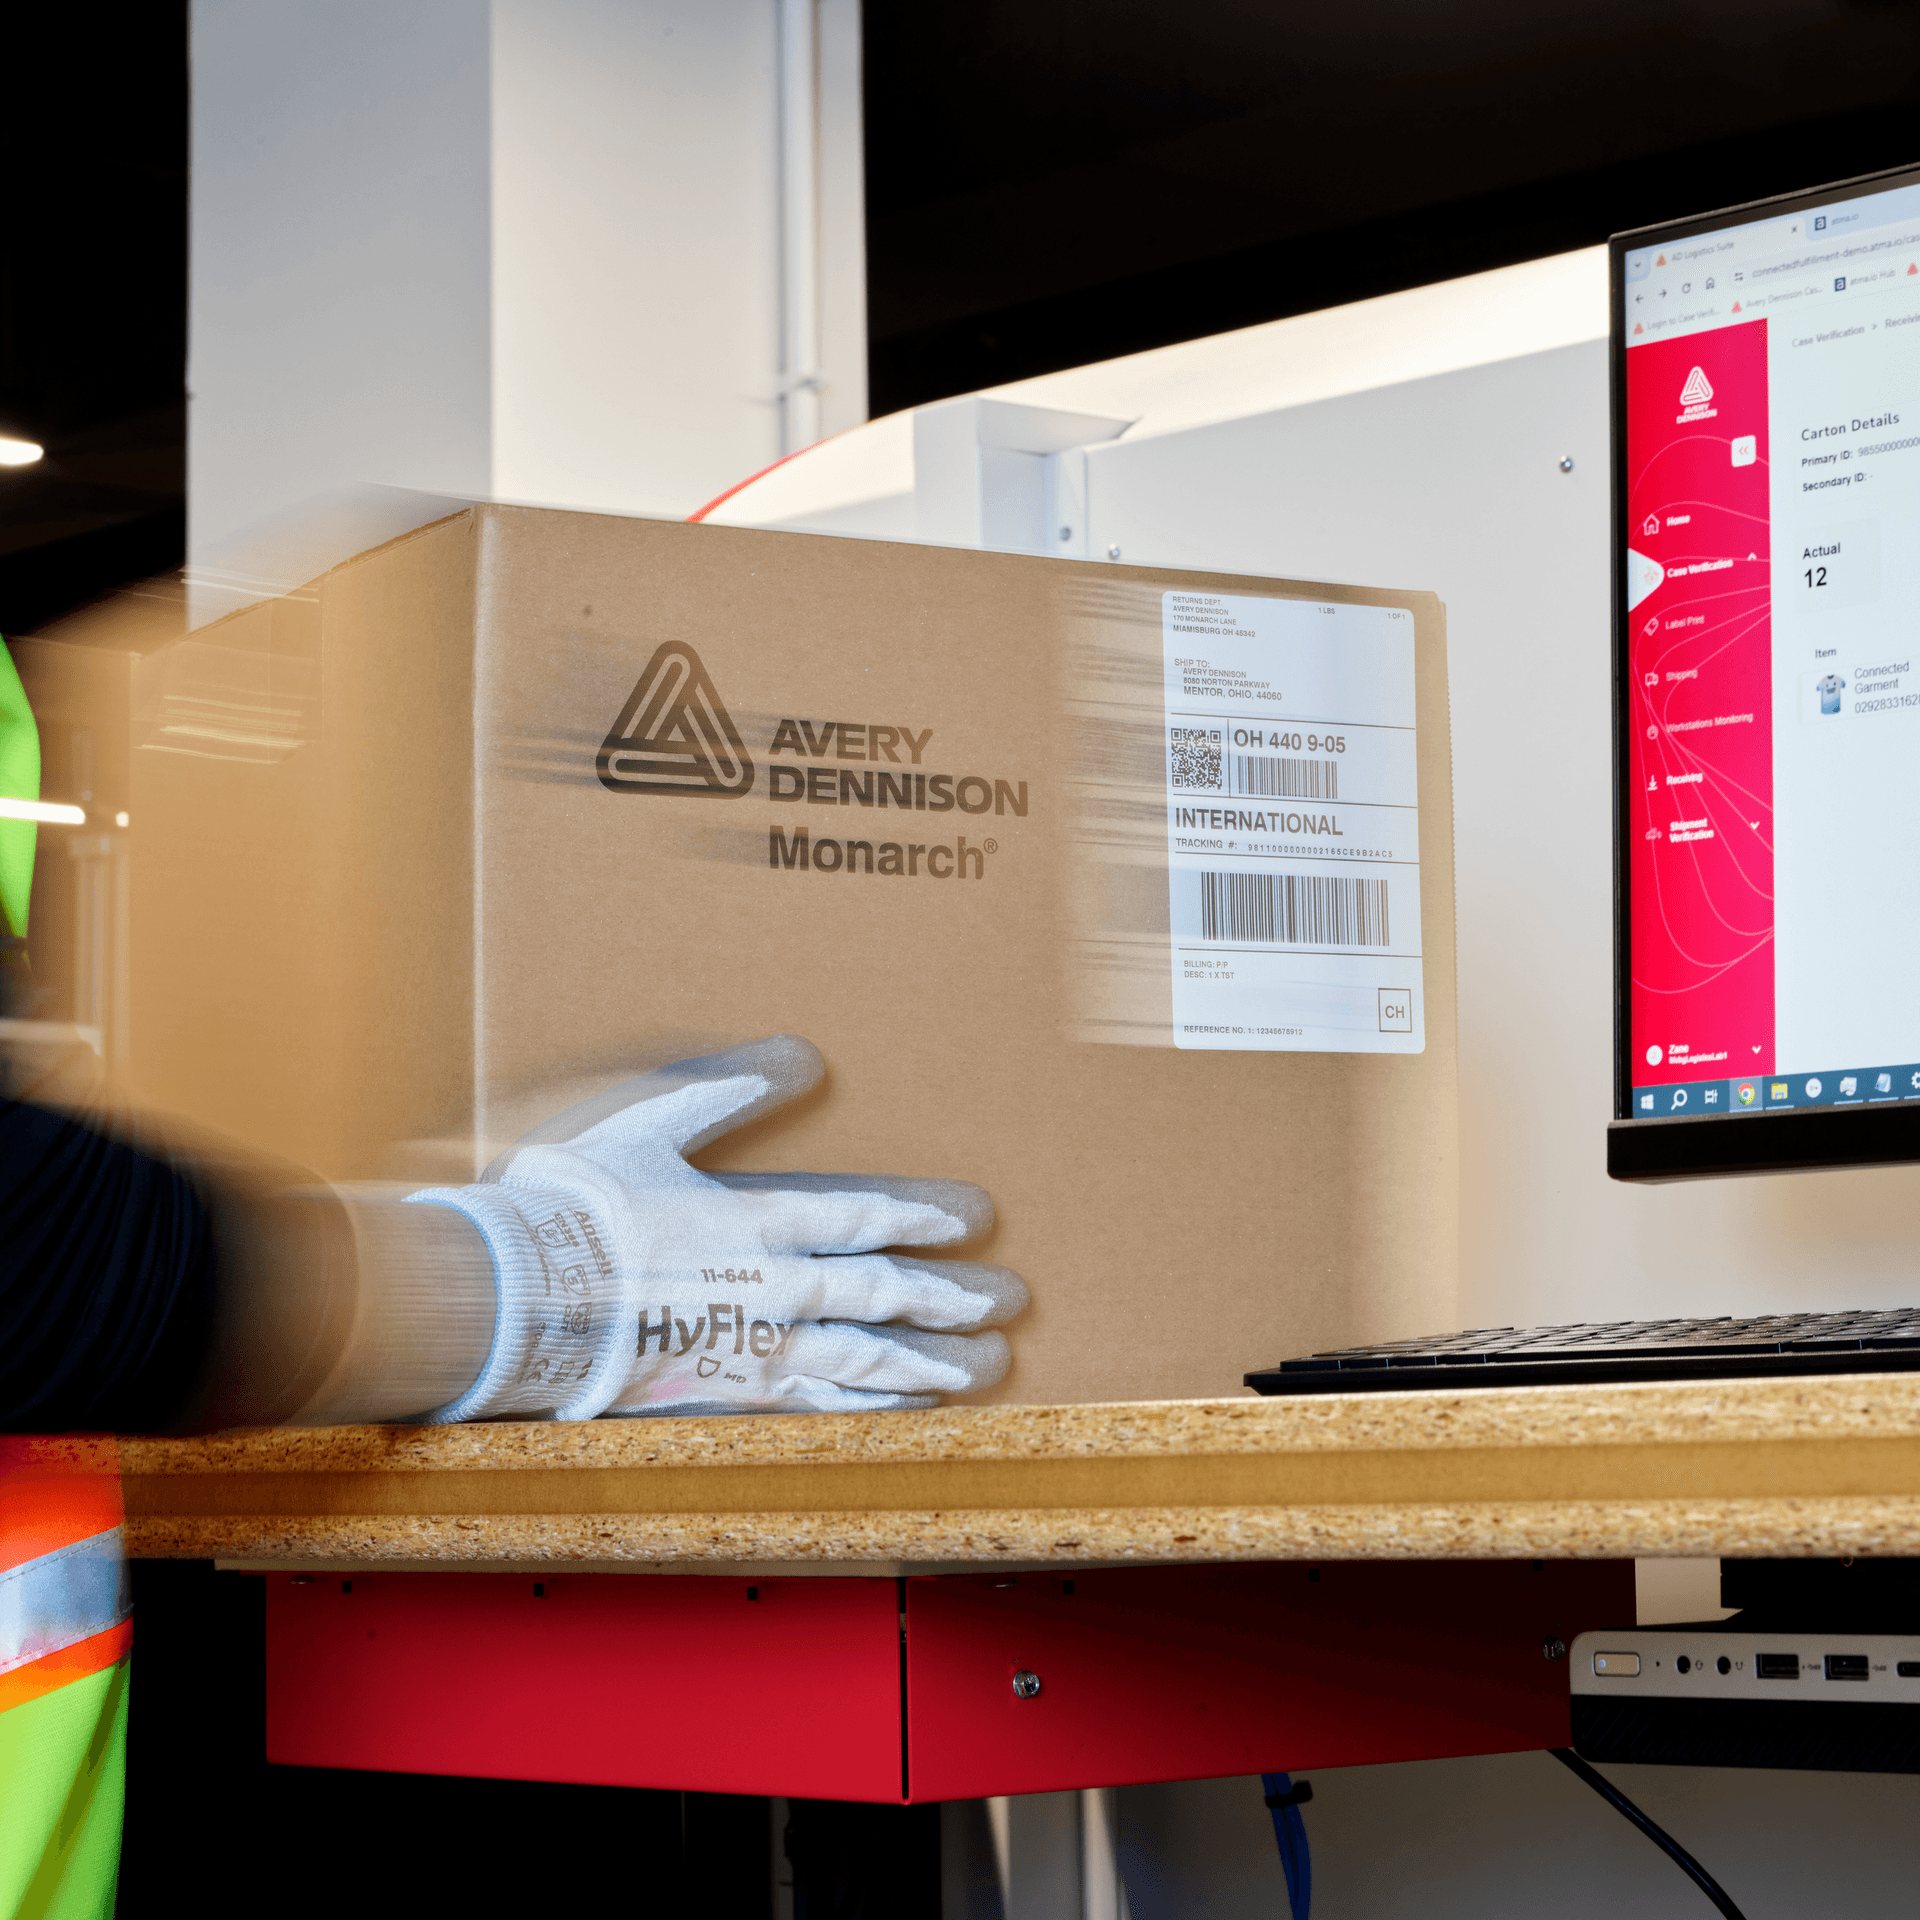 hand held scanner scanning a barcode on a package